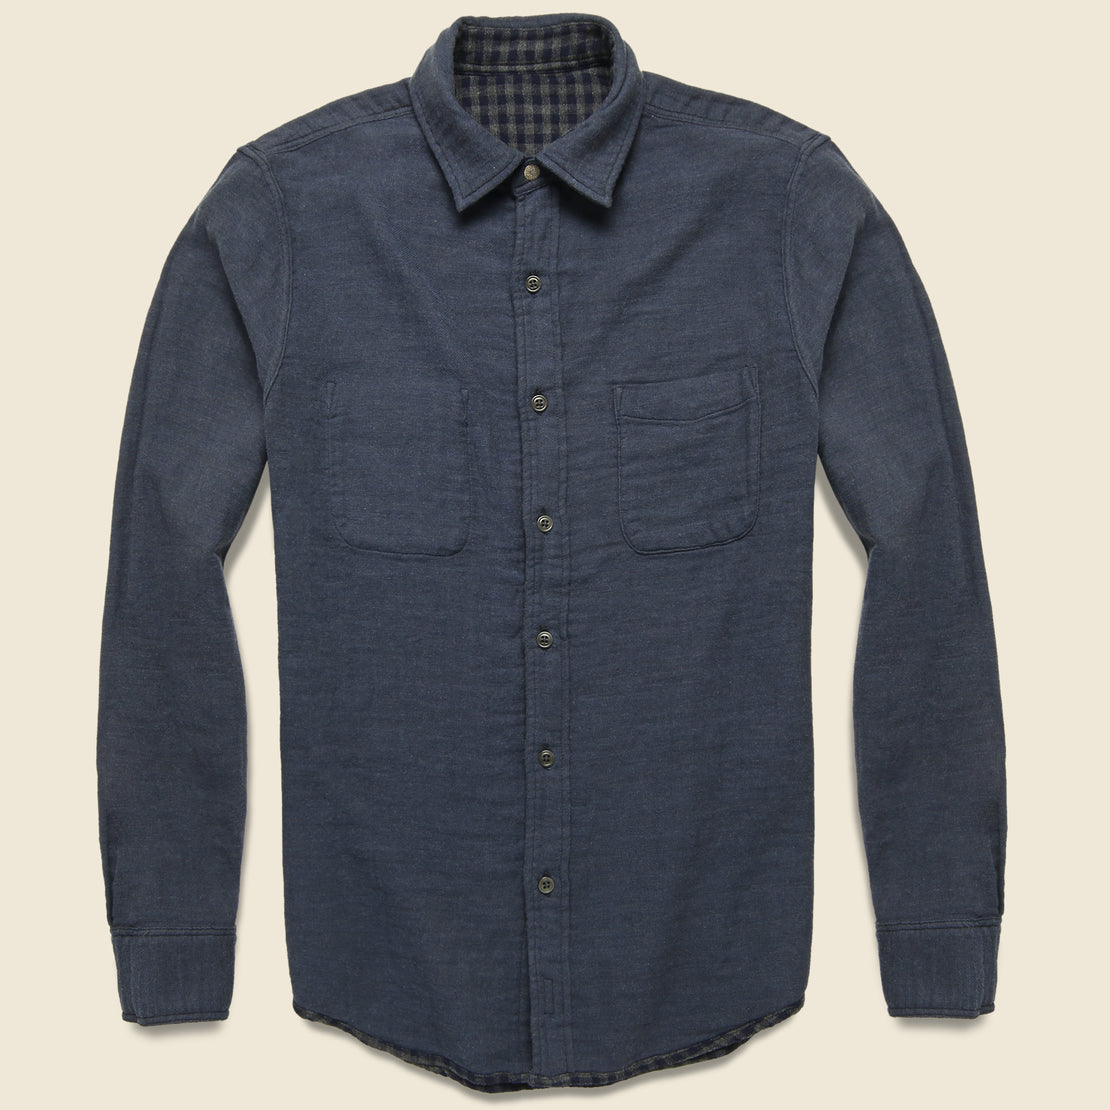 Belmar Workshirt - Charcoal Navy Check - Faherty - STAG Provisions - Tops - L/S Woven - Plaid